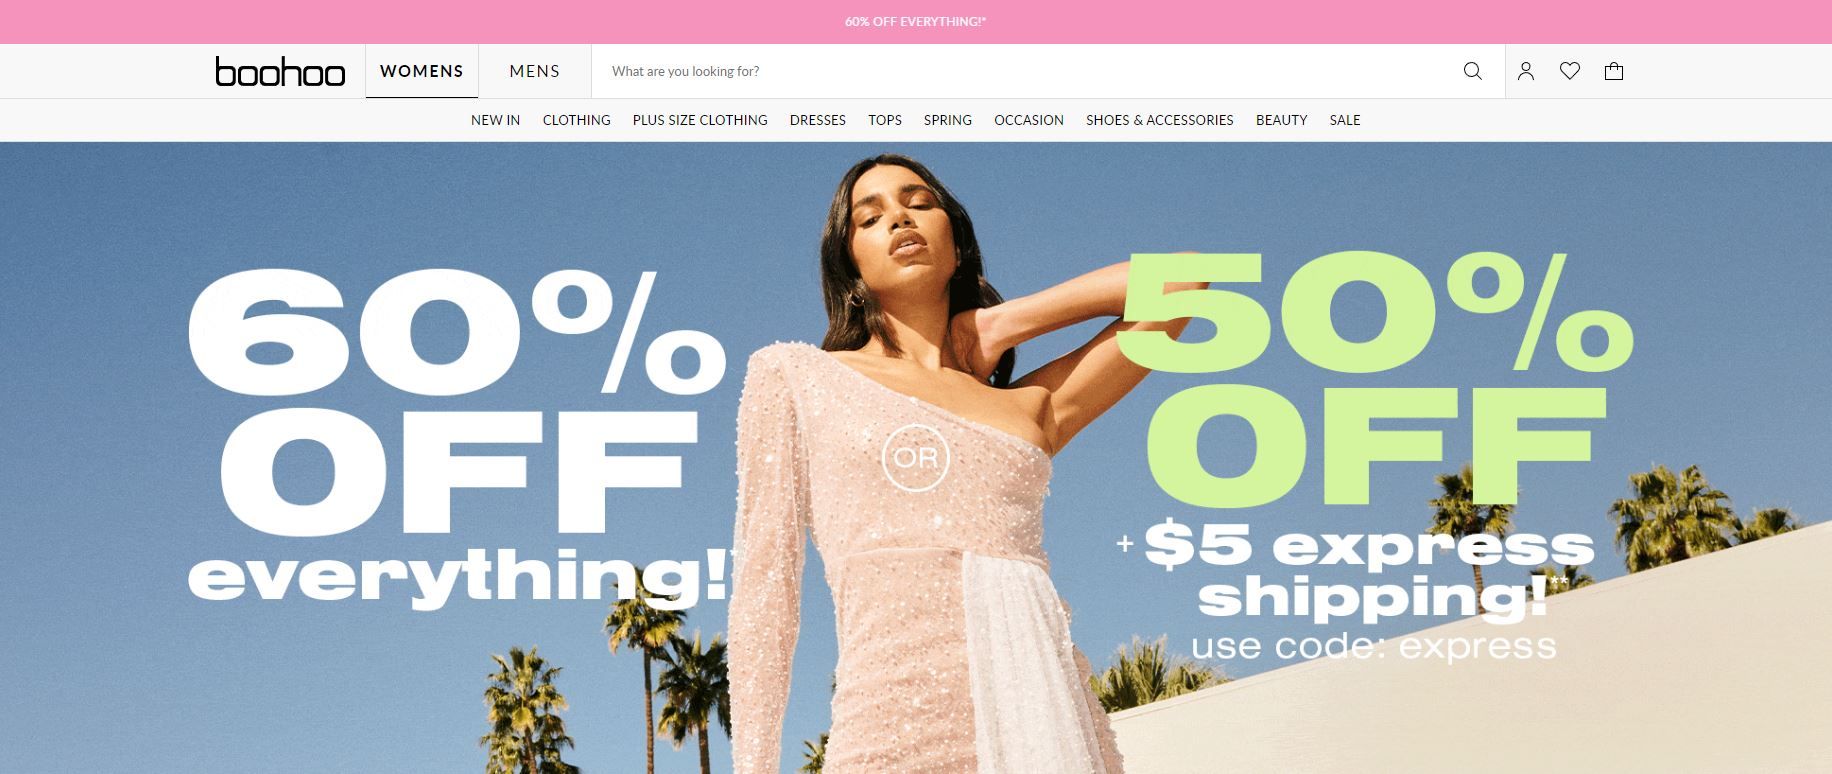 10 Stores Like Shein: Best Alternatives and Affordable Options - 24/7 Wall  St.